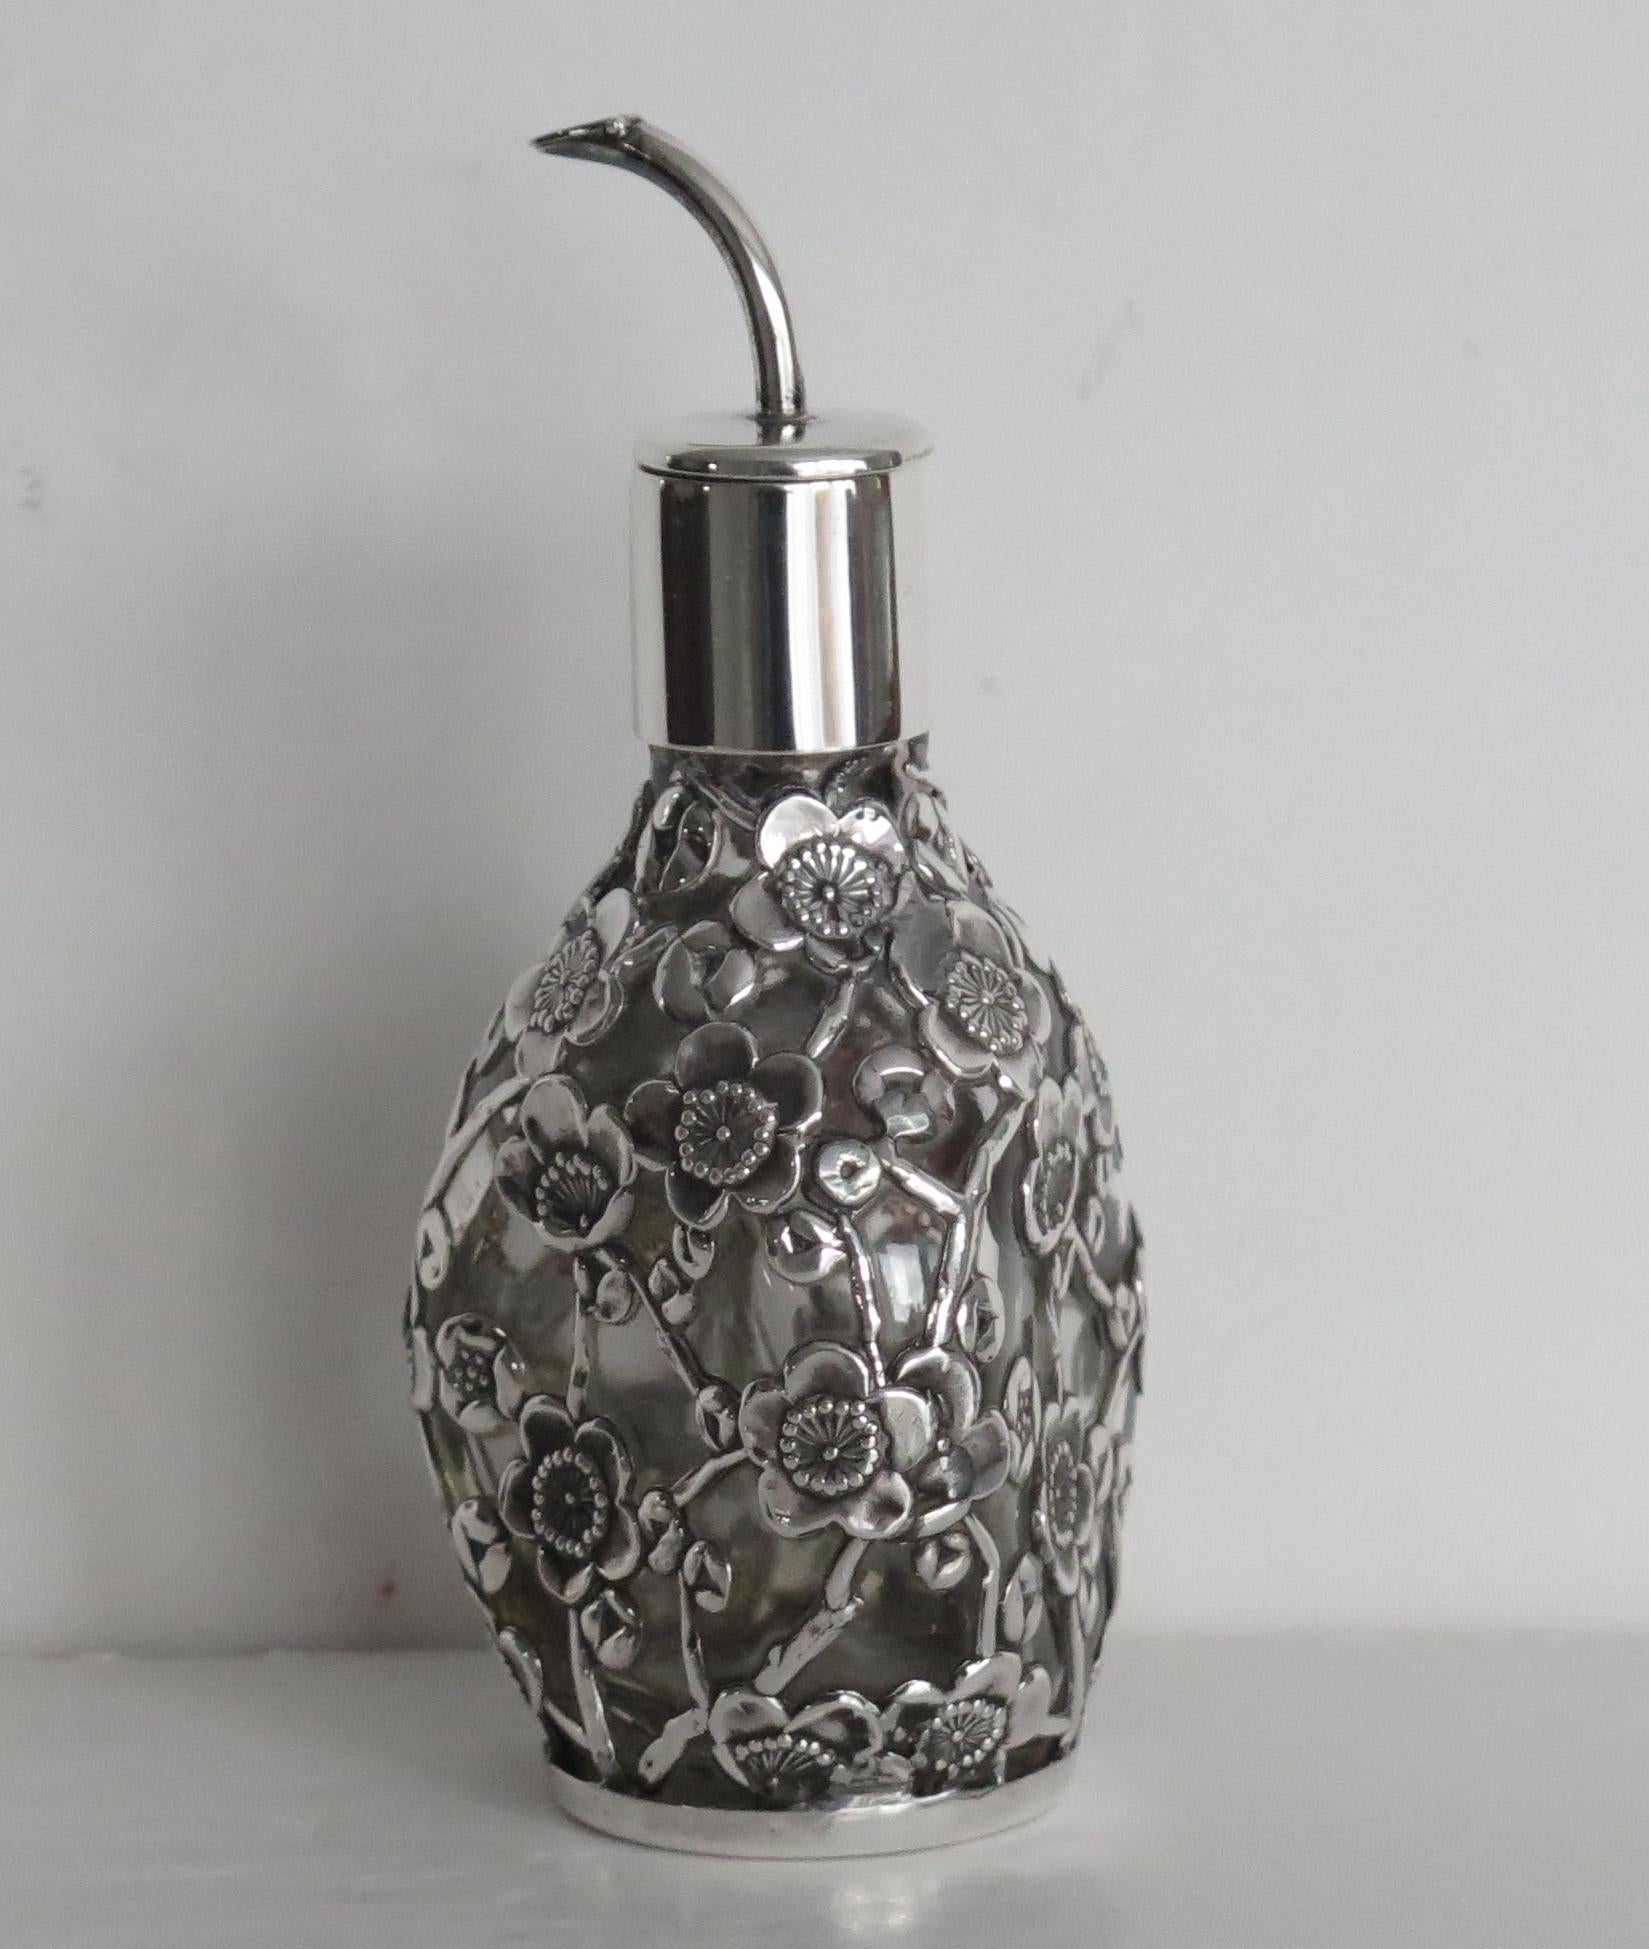 This is a high quality sterling silver cased glass perfume or scent bottle, made in Edwardian England, Circa 1900 to 1910

The pressed glass bottle has a triangular shape with curved sides. The bottle is encased with a sterling silver filigree case